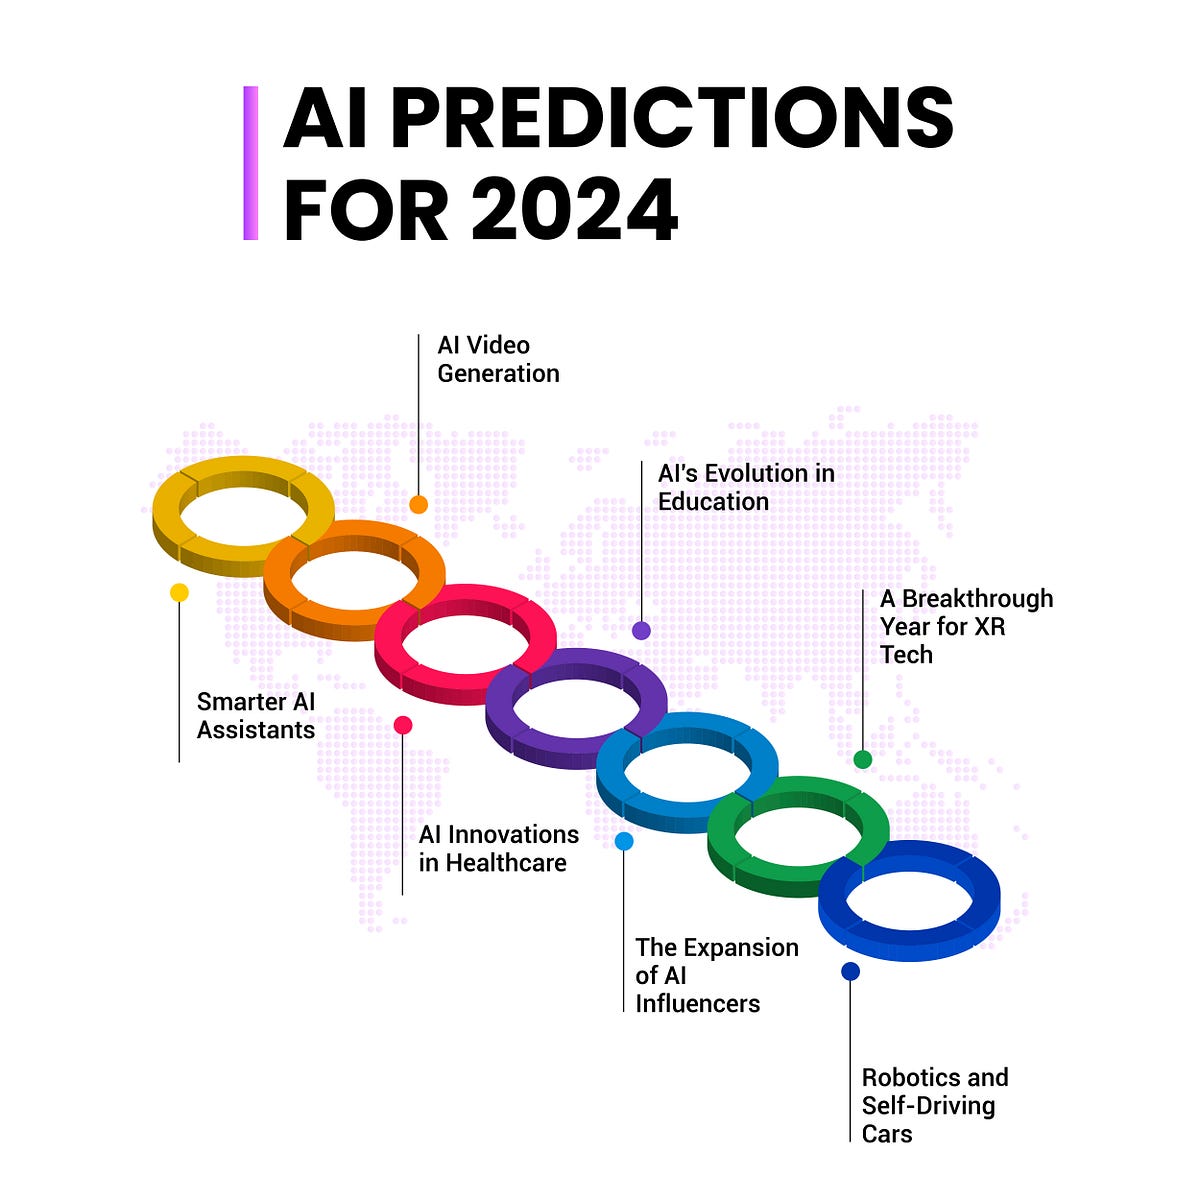 2024 Will Bring Human-like AI Assistants to Your Daily Life